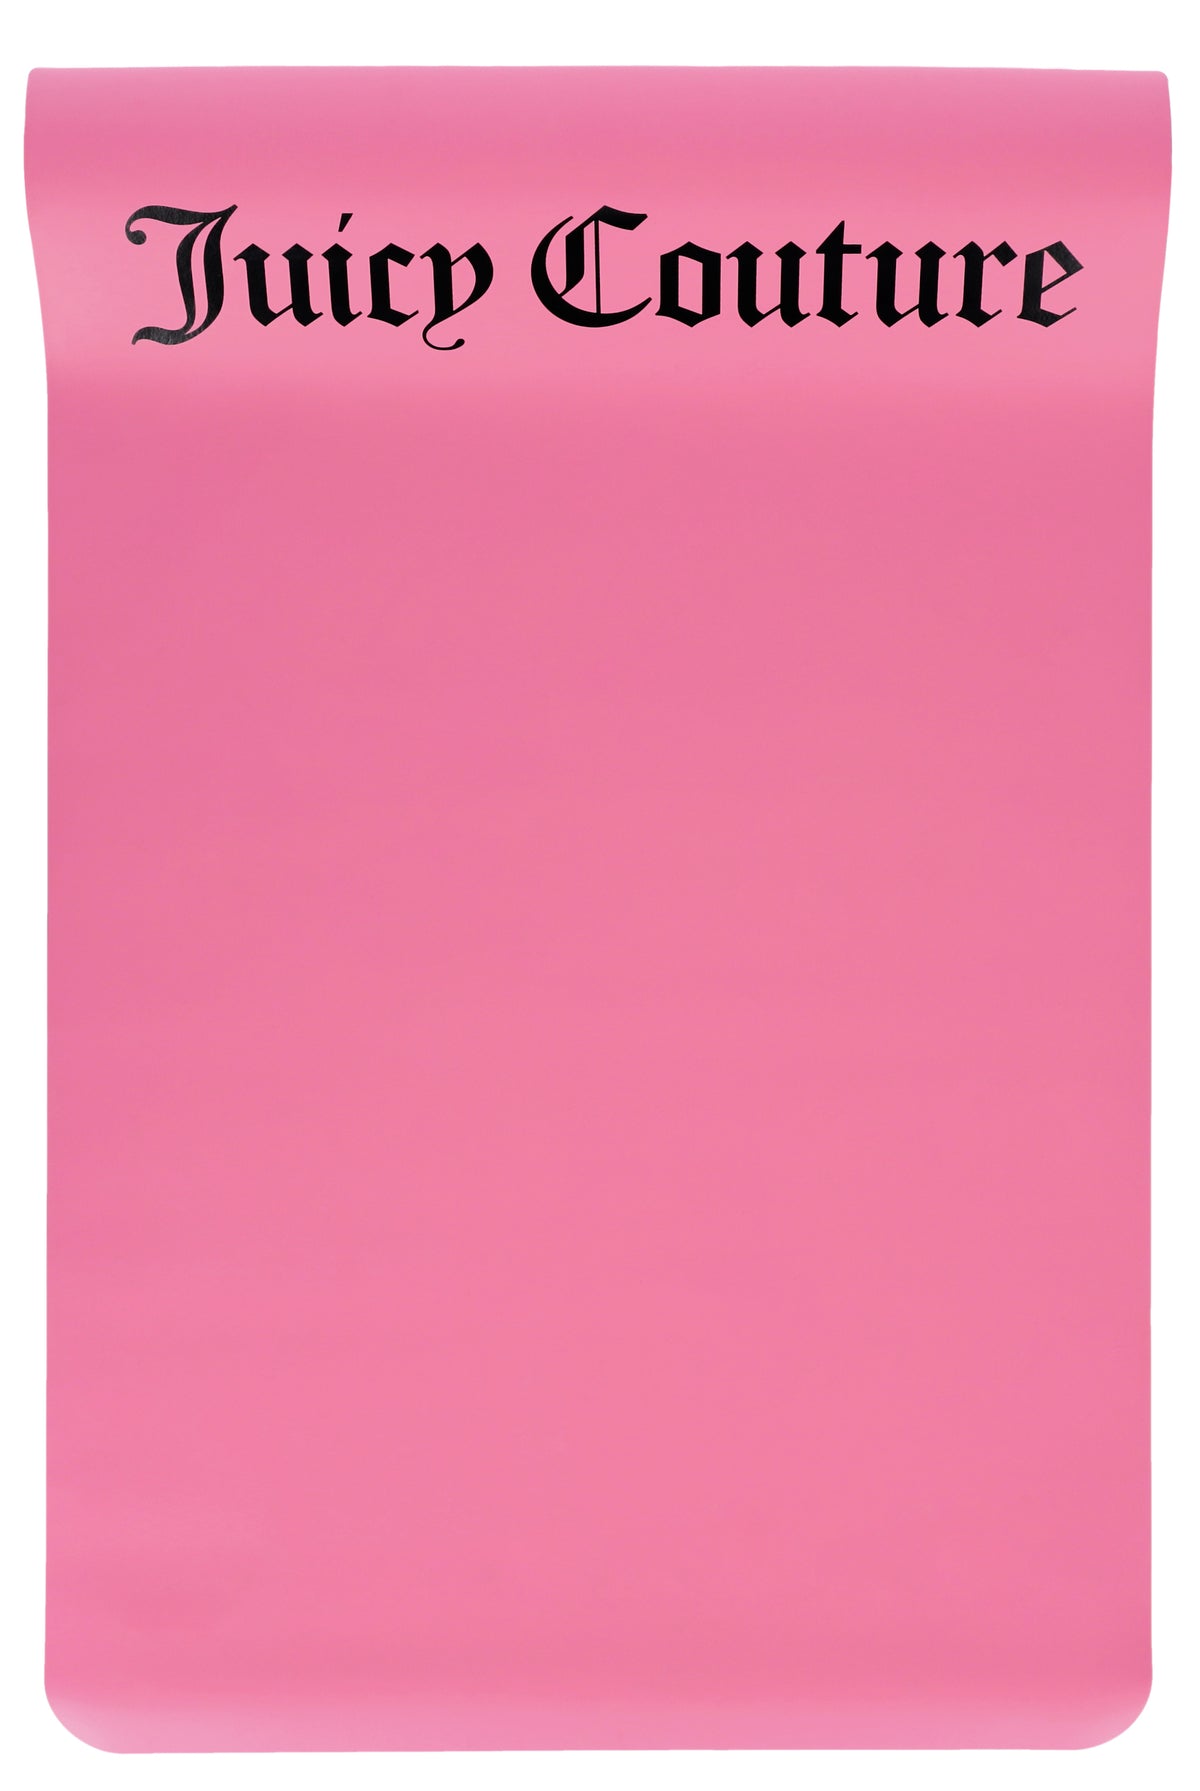 Juicy Couture Wallpapers